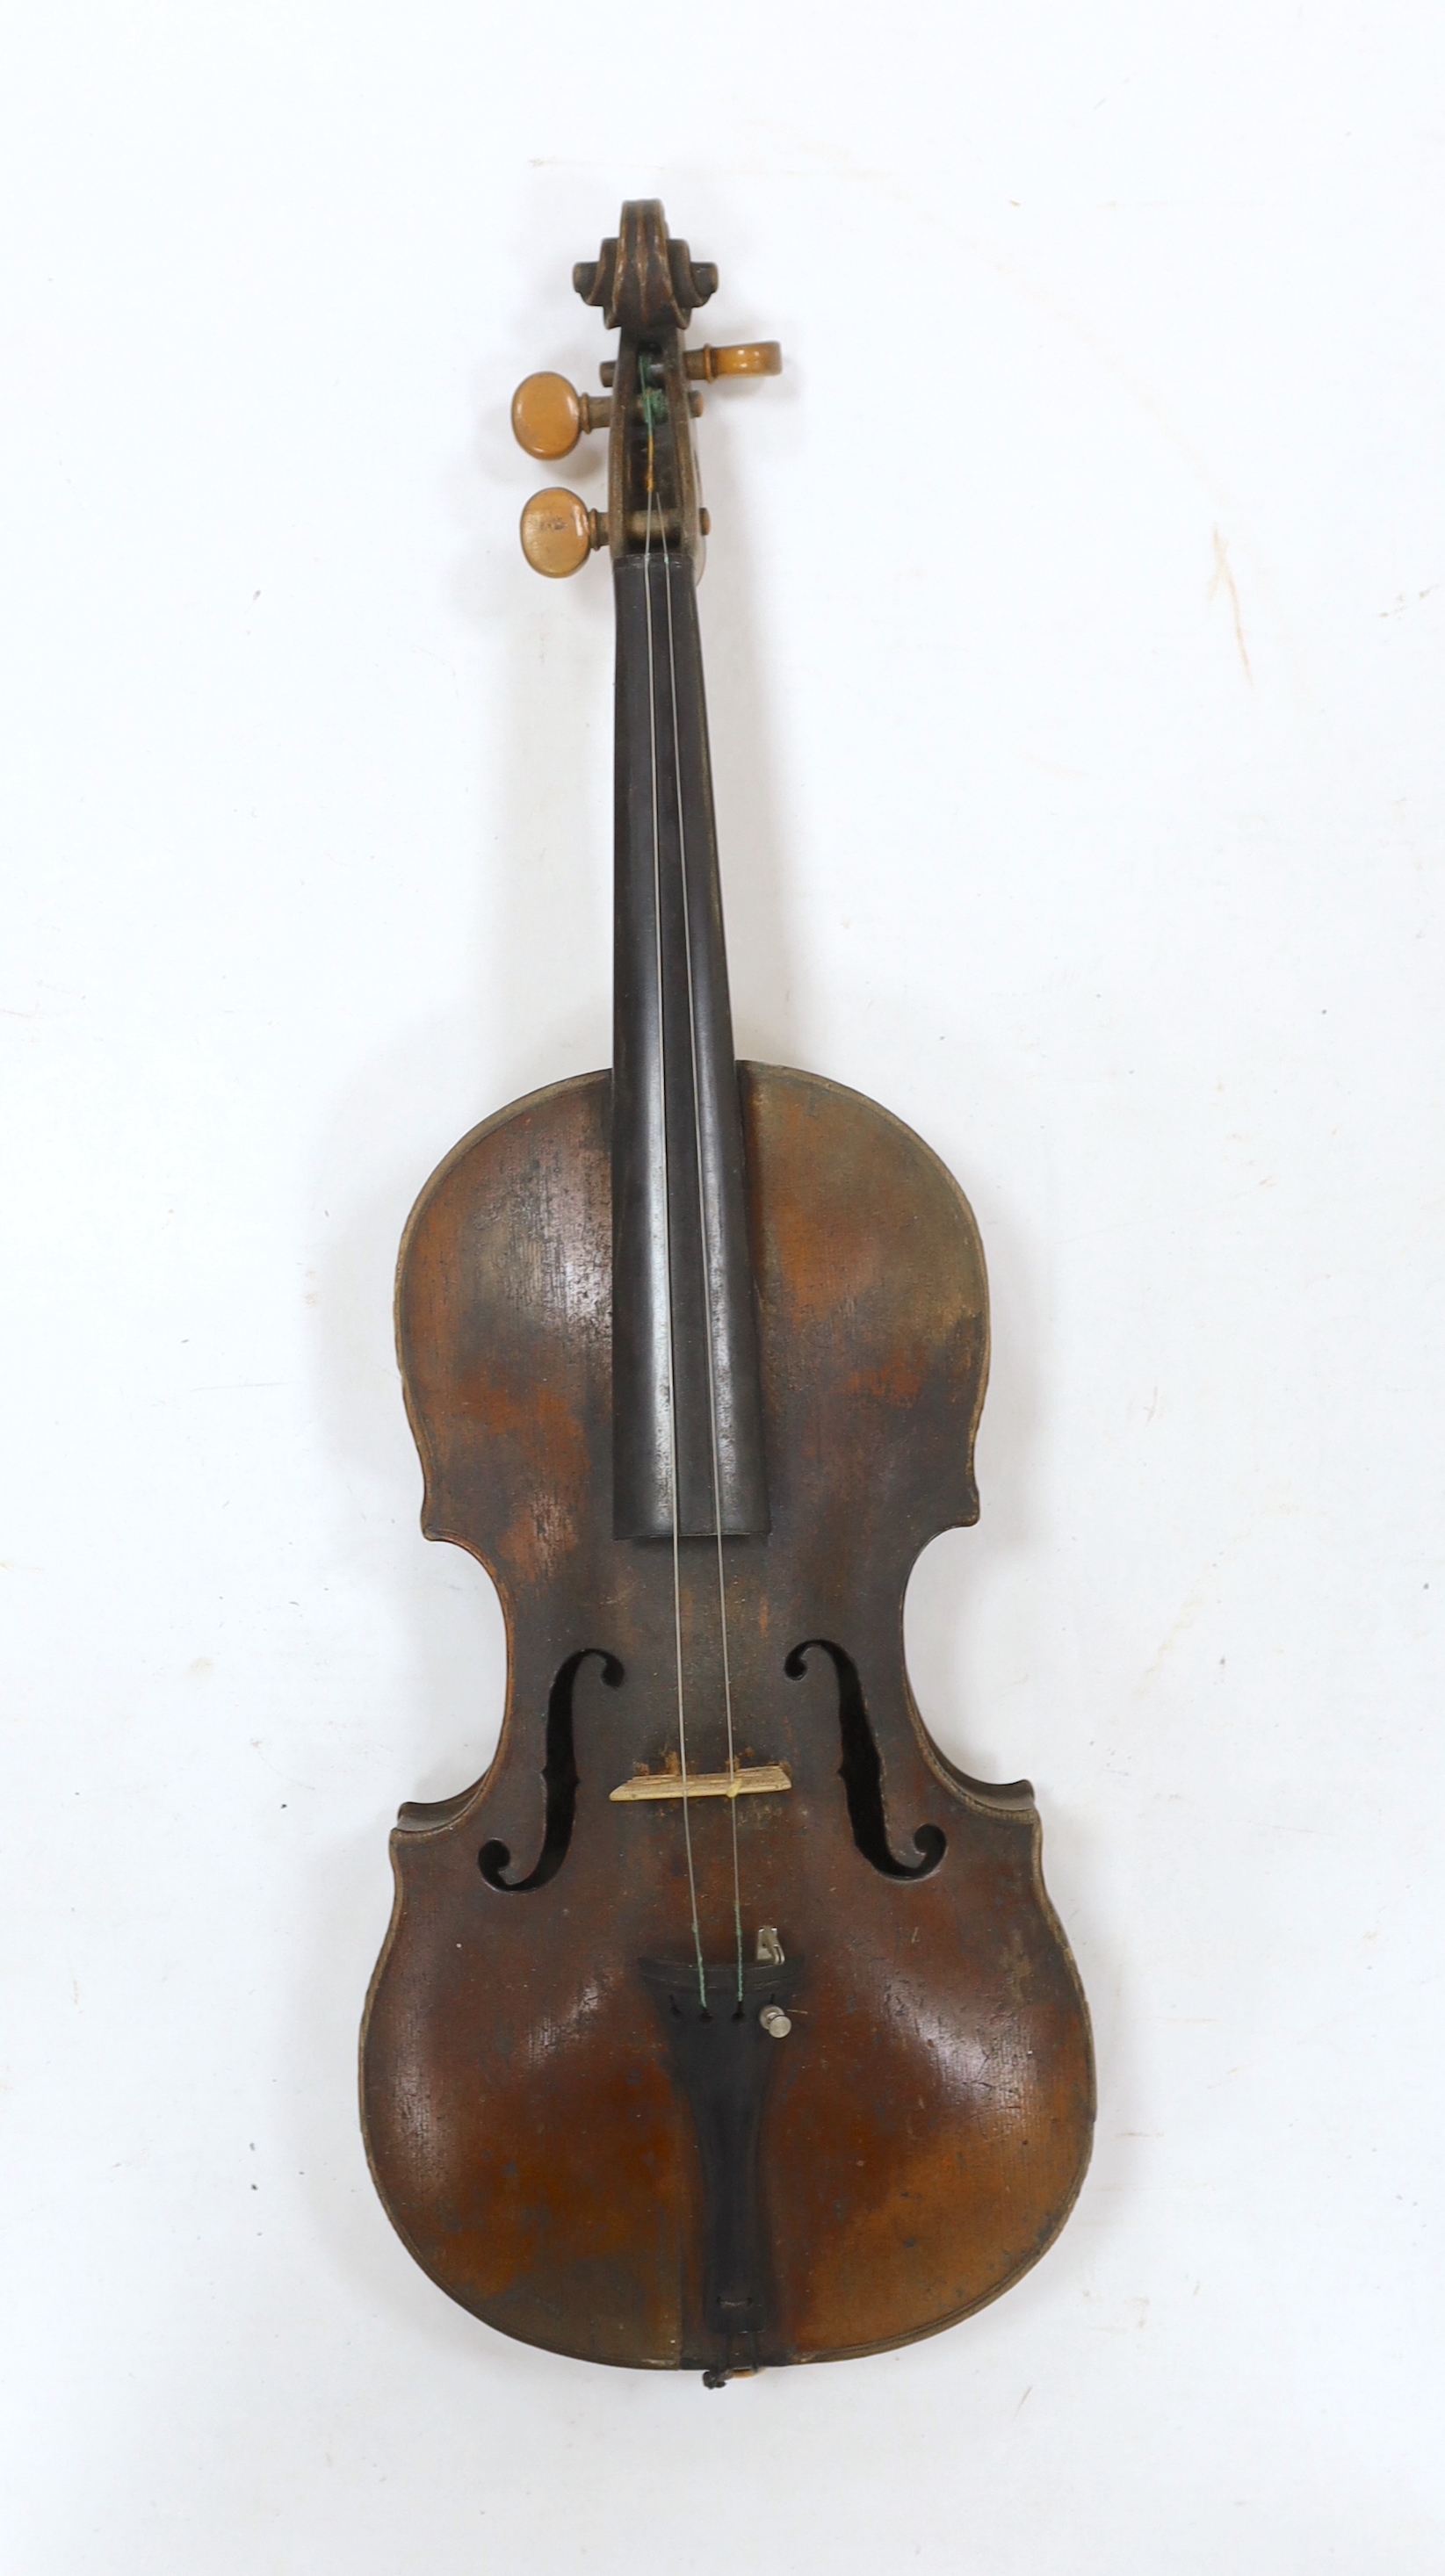 Two late 19th/early 20th cased century violins